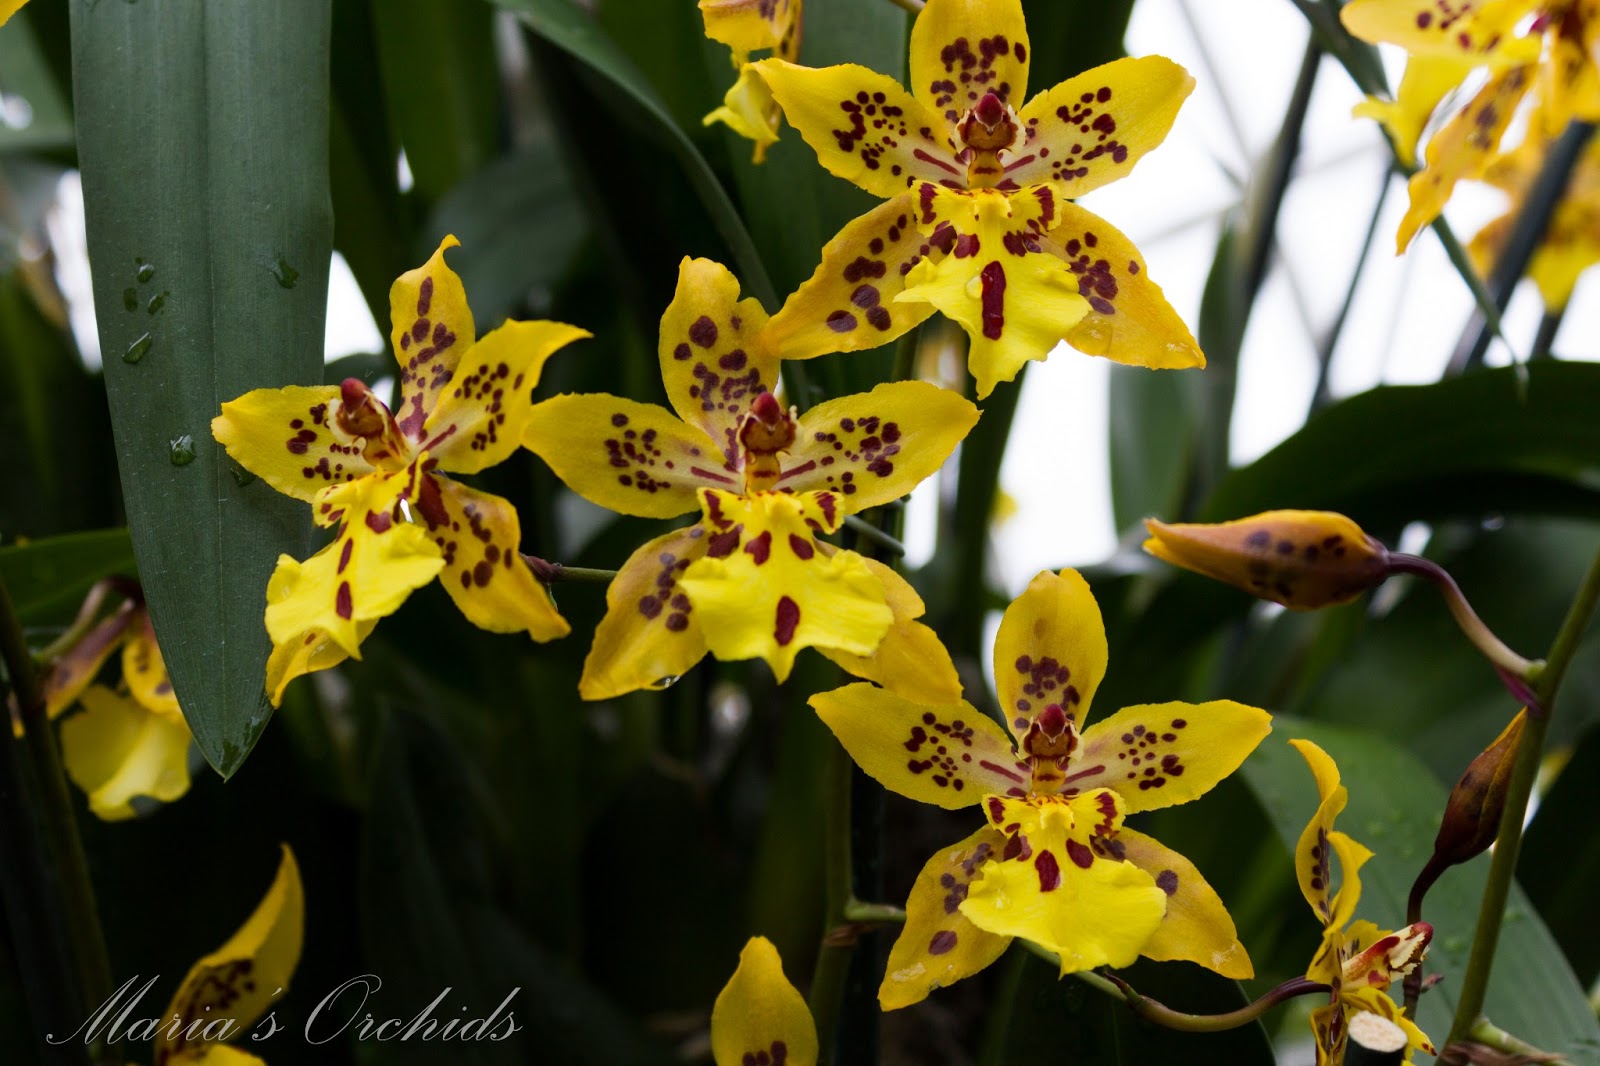 Maria's Orchids: New York Orchid Show 2013: Oncidiums